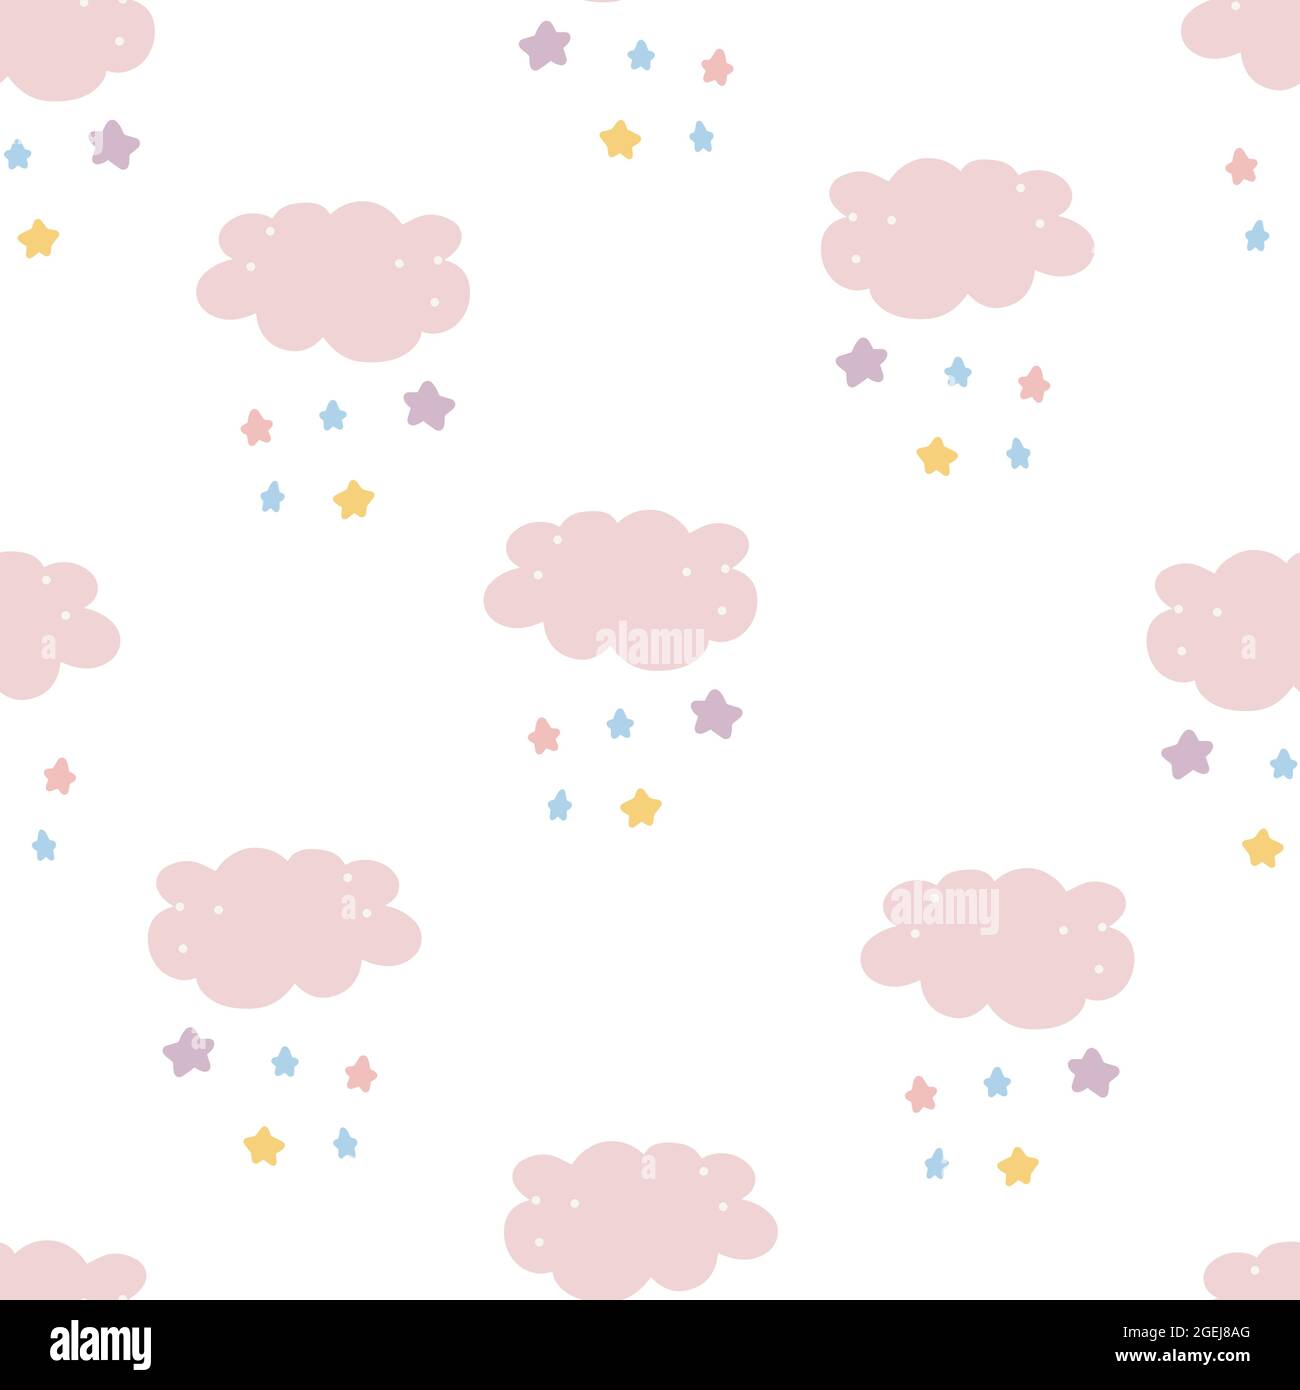 Cute Cloud Seamless Pattern Vector background cute lovely white cloud and stars Hand draw style Stock Vector